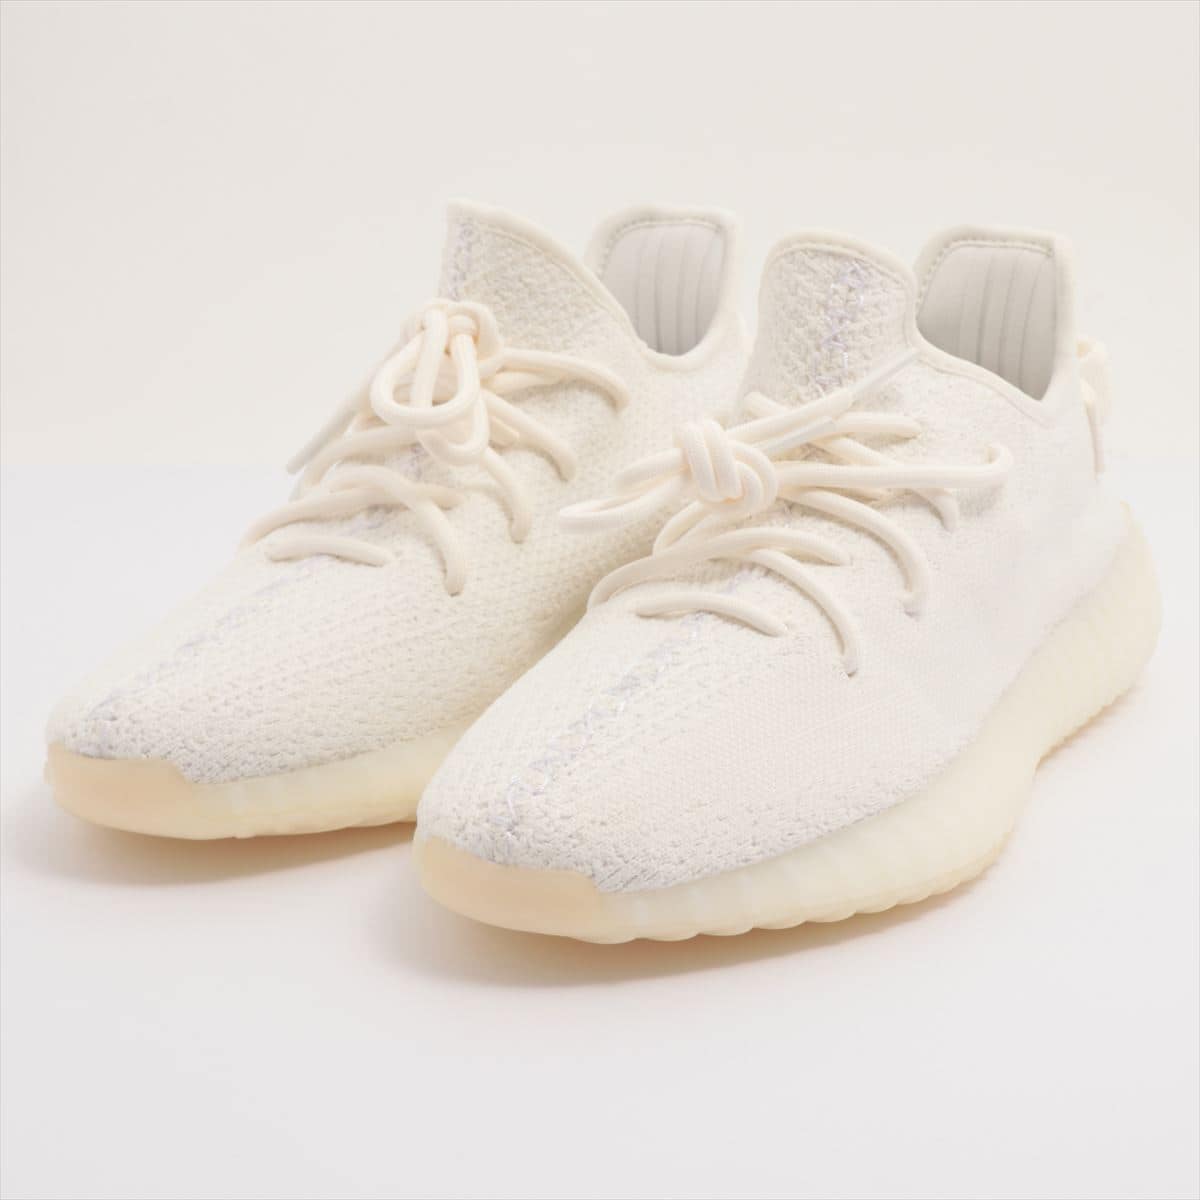 Adidas YEEZY BOOST 350 V2 Mesh Sneakers 26.0 Men's White There is a slight discoloration on the heel.